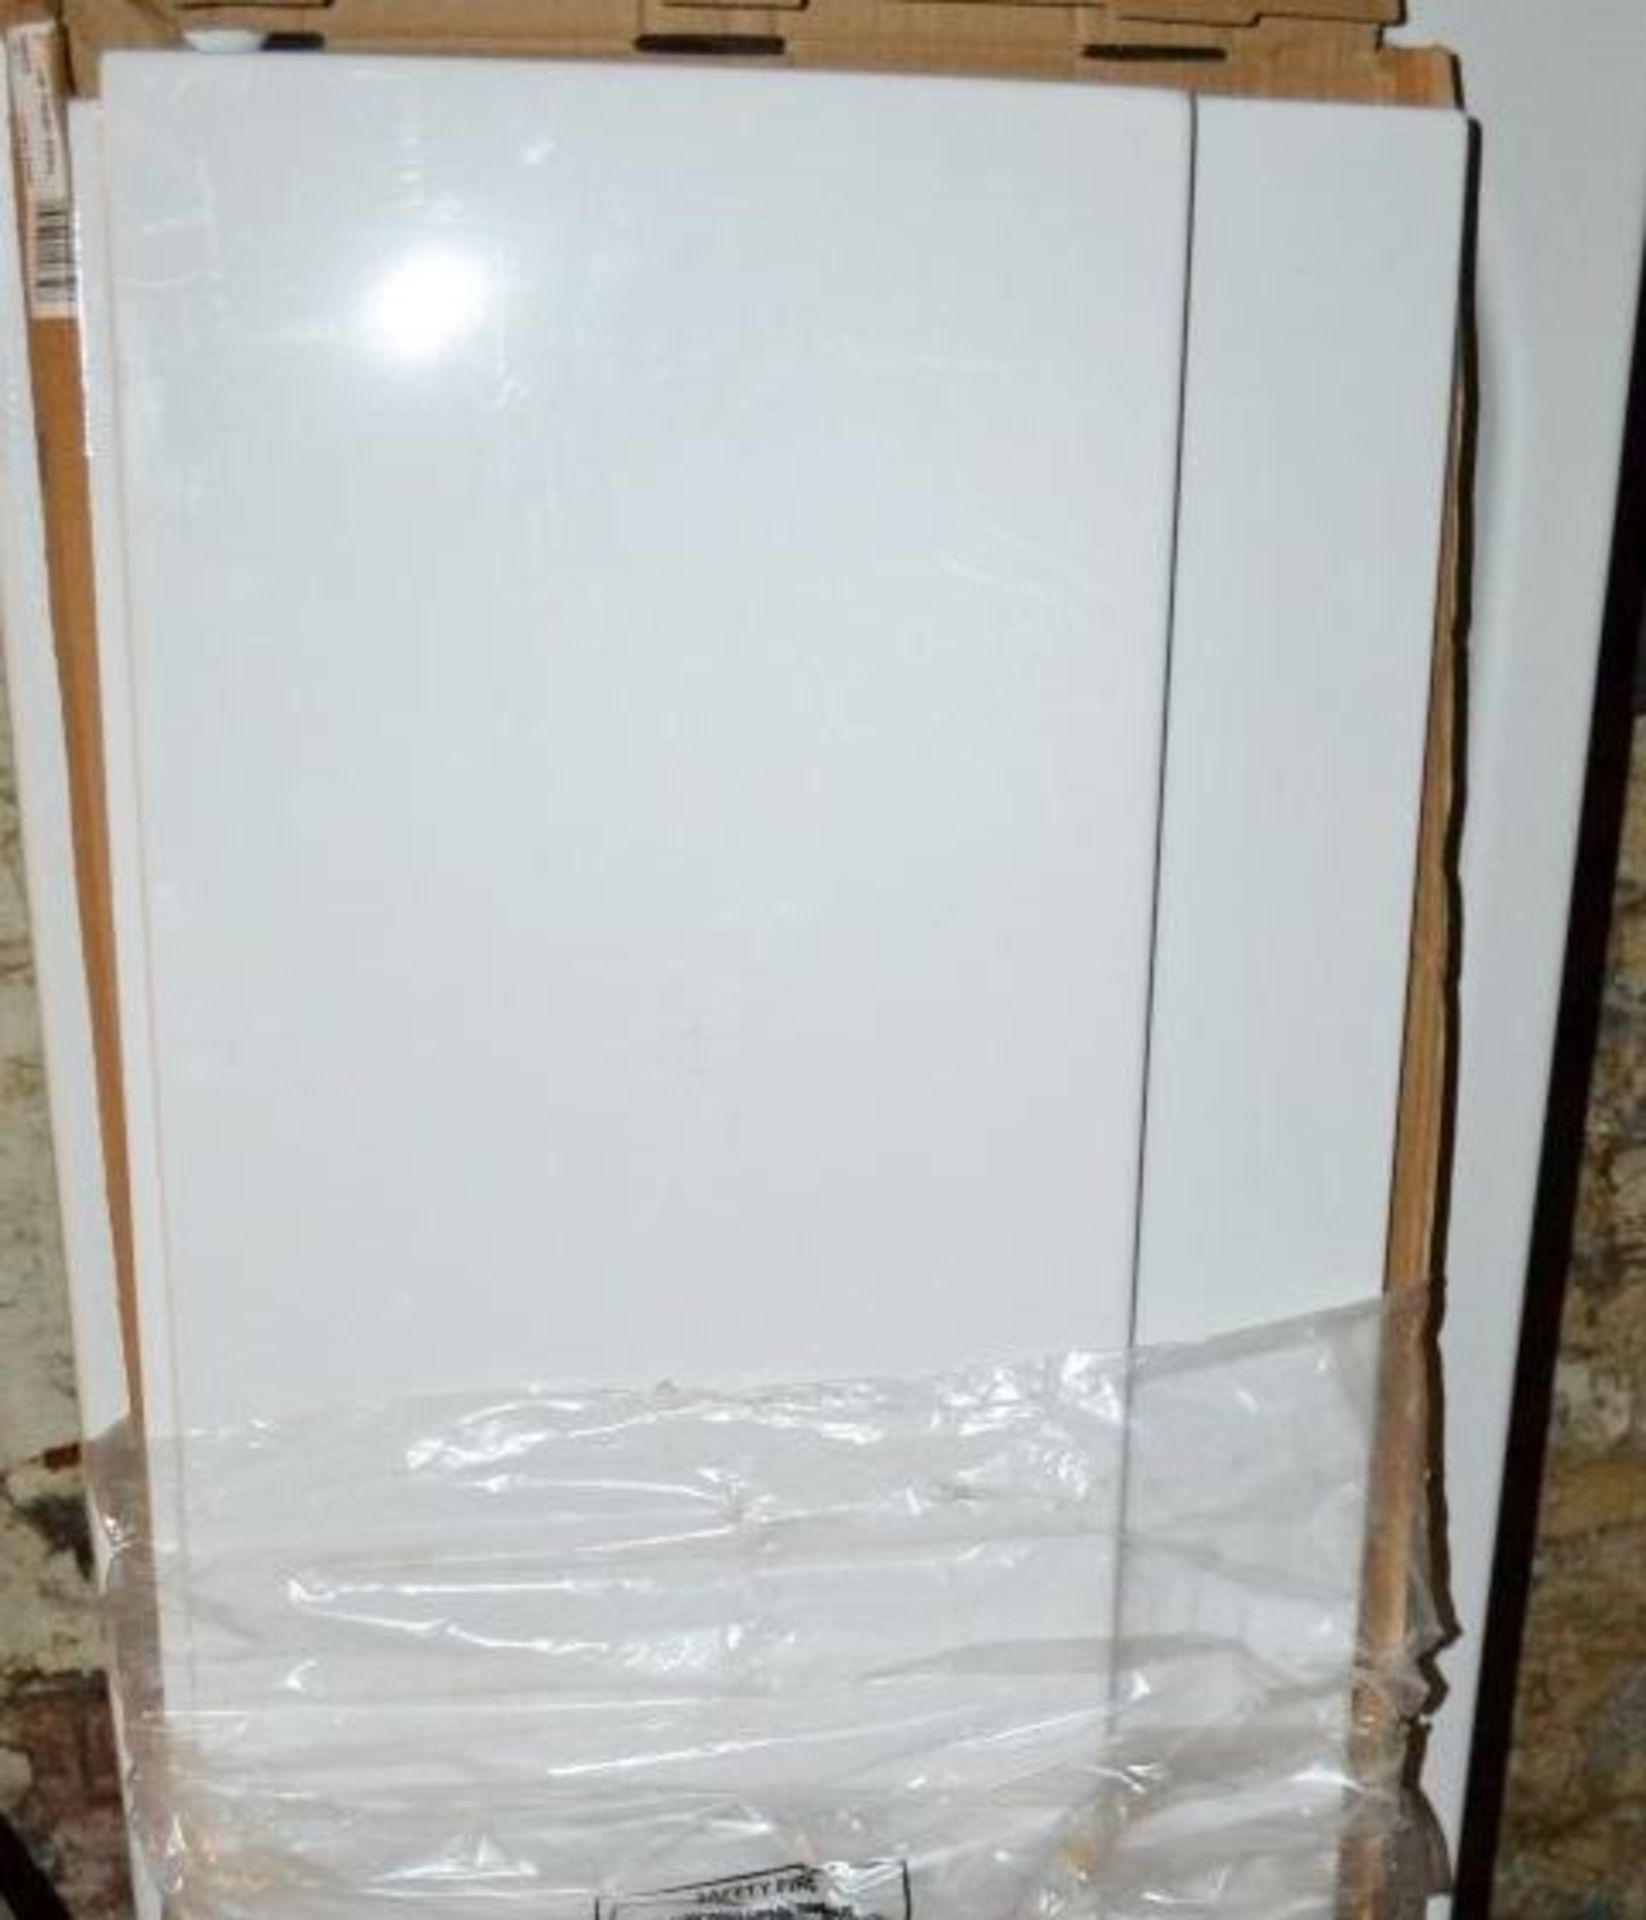 1 x Styrene Front Bath Panel - New / Unused Stock - Dimensions: 1500 x 540mm - CL269 - Ref LH295 (GM - Image 3 of 3